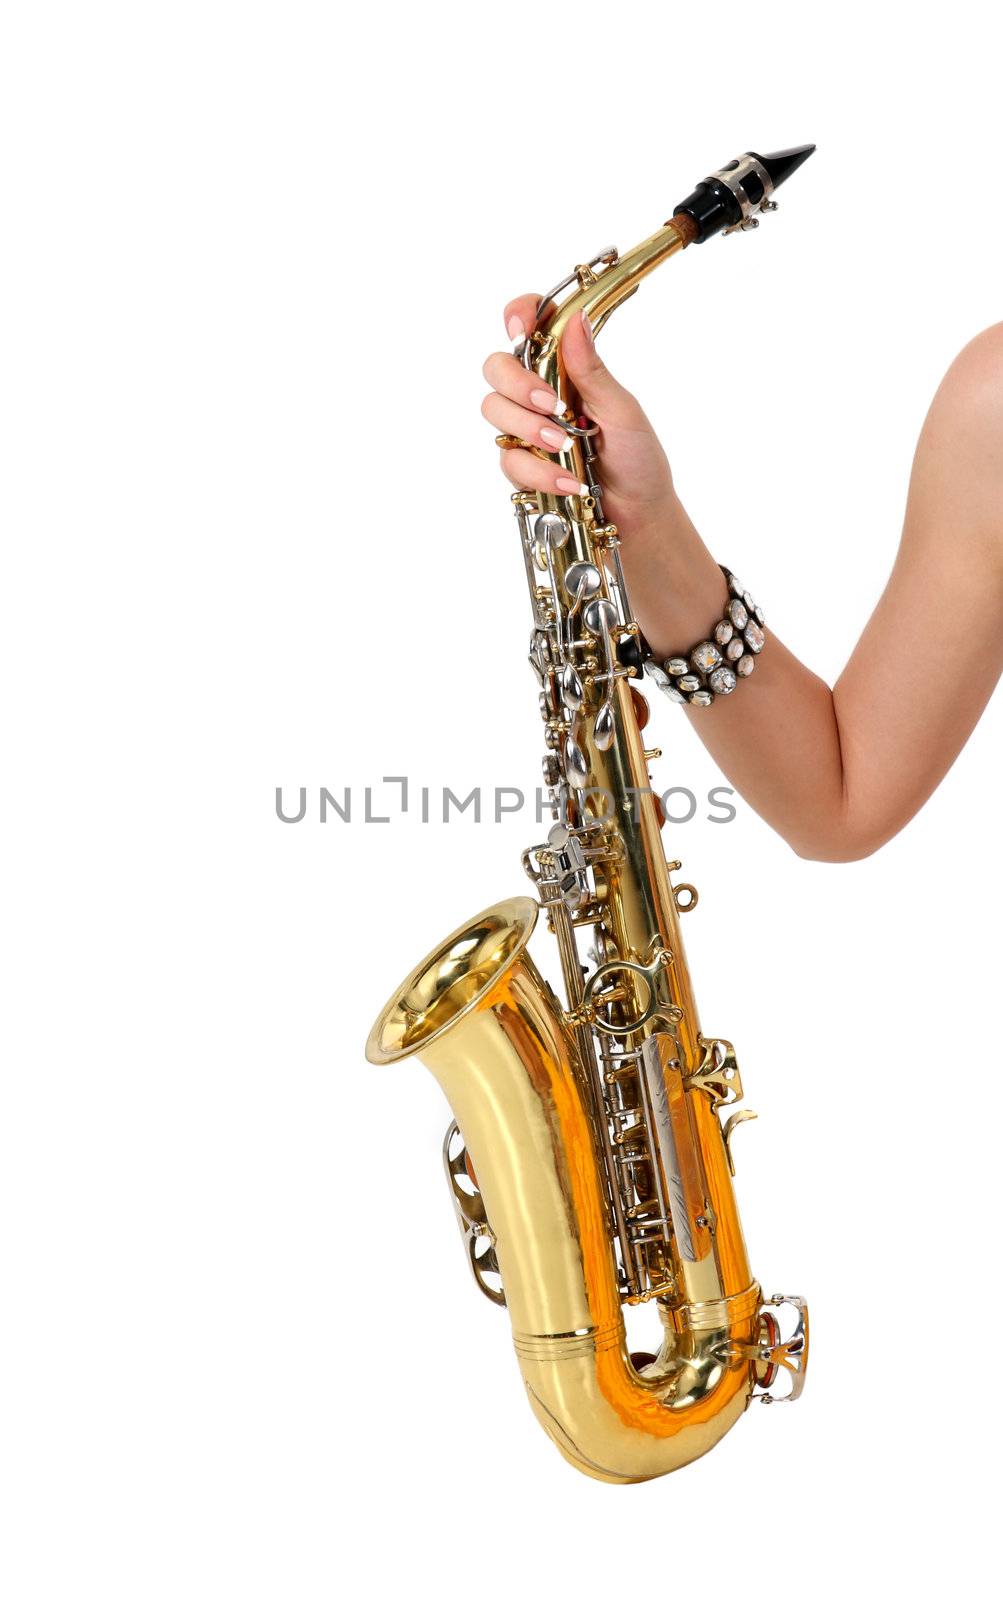 Saxophone in the women's hand on the white background
